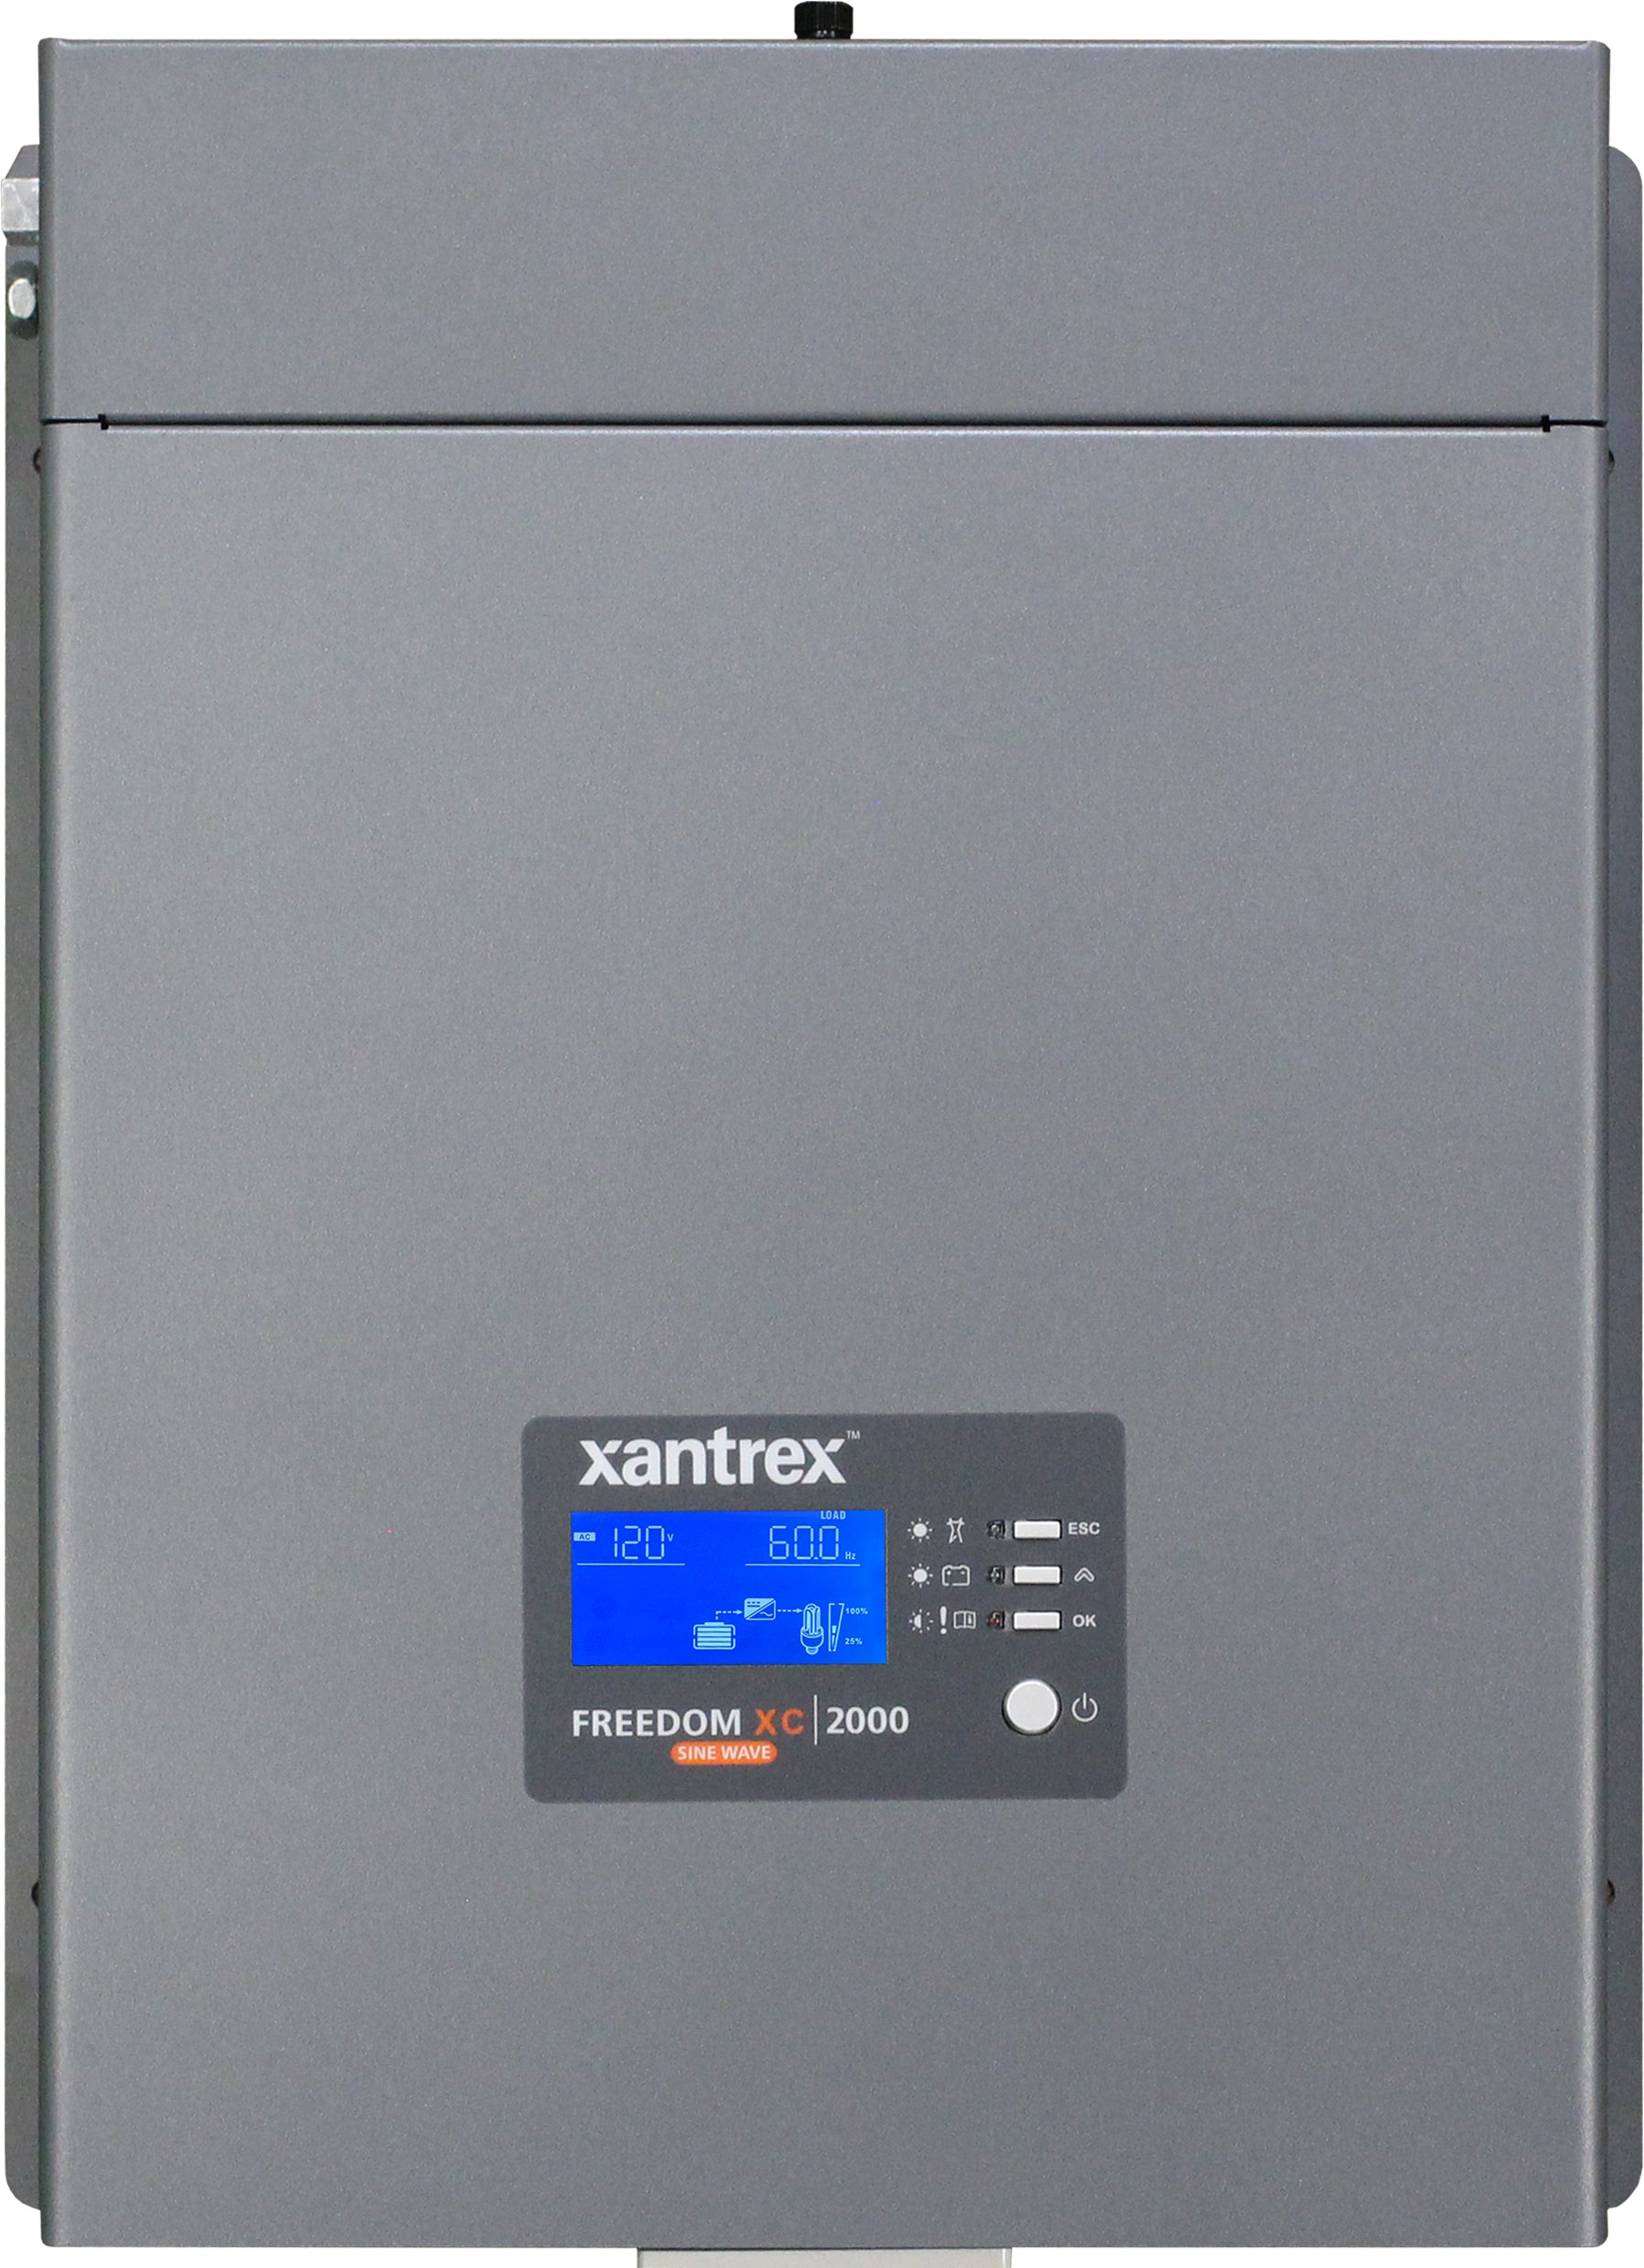 Xantrex 818-2010 Freedom XC Pro 2000 Inverter/Charger - 2000W, 100A